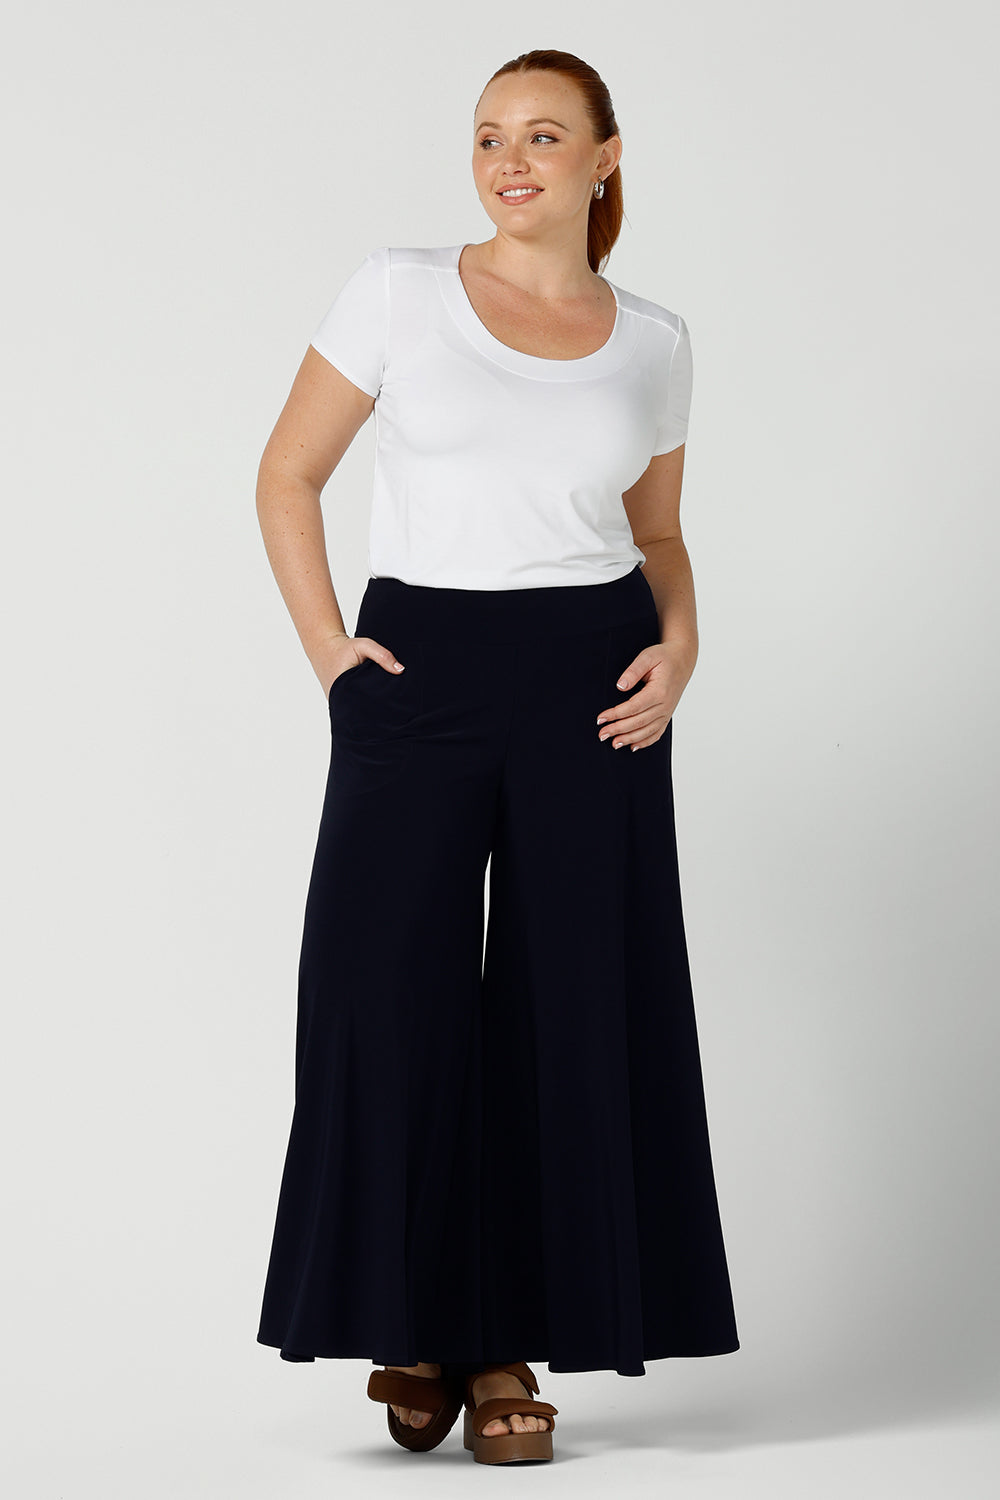 A curvy size, size 12 woman wears wide leg pants with pockets with a white bamboo top. These pull-on, easy care pants are comfortable for your everyday workwear capsule wardrobe. Shop these Australian-made wide leg trousers online in sizes 8 to 24, petite to plus sizes.